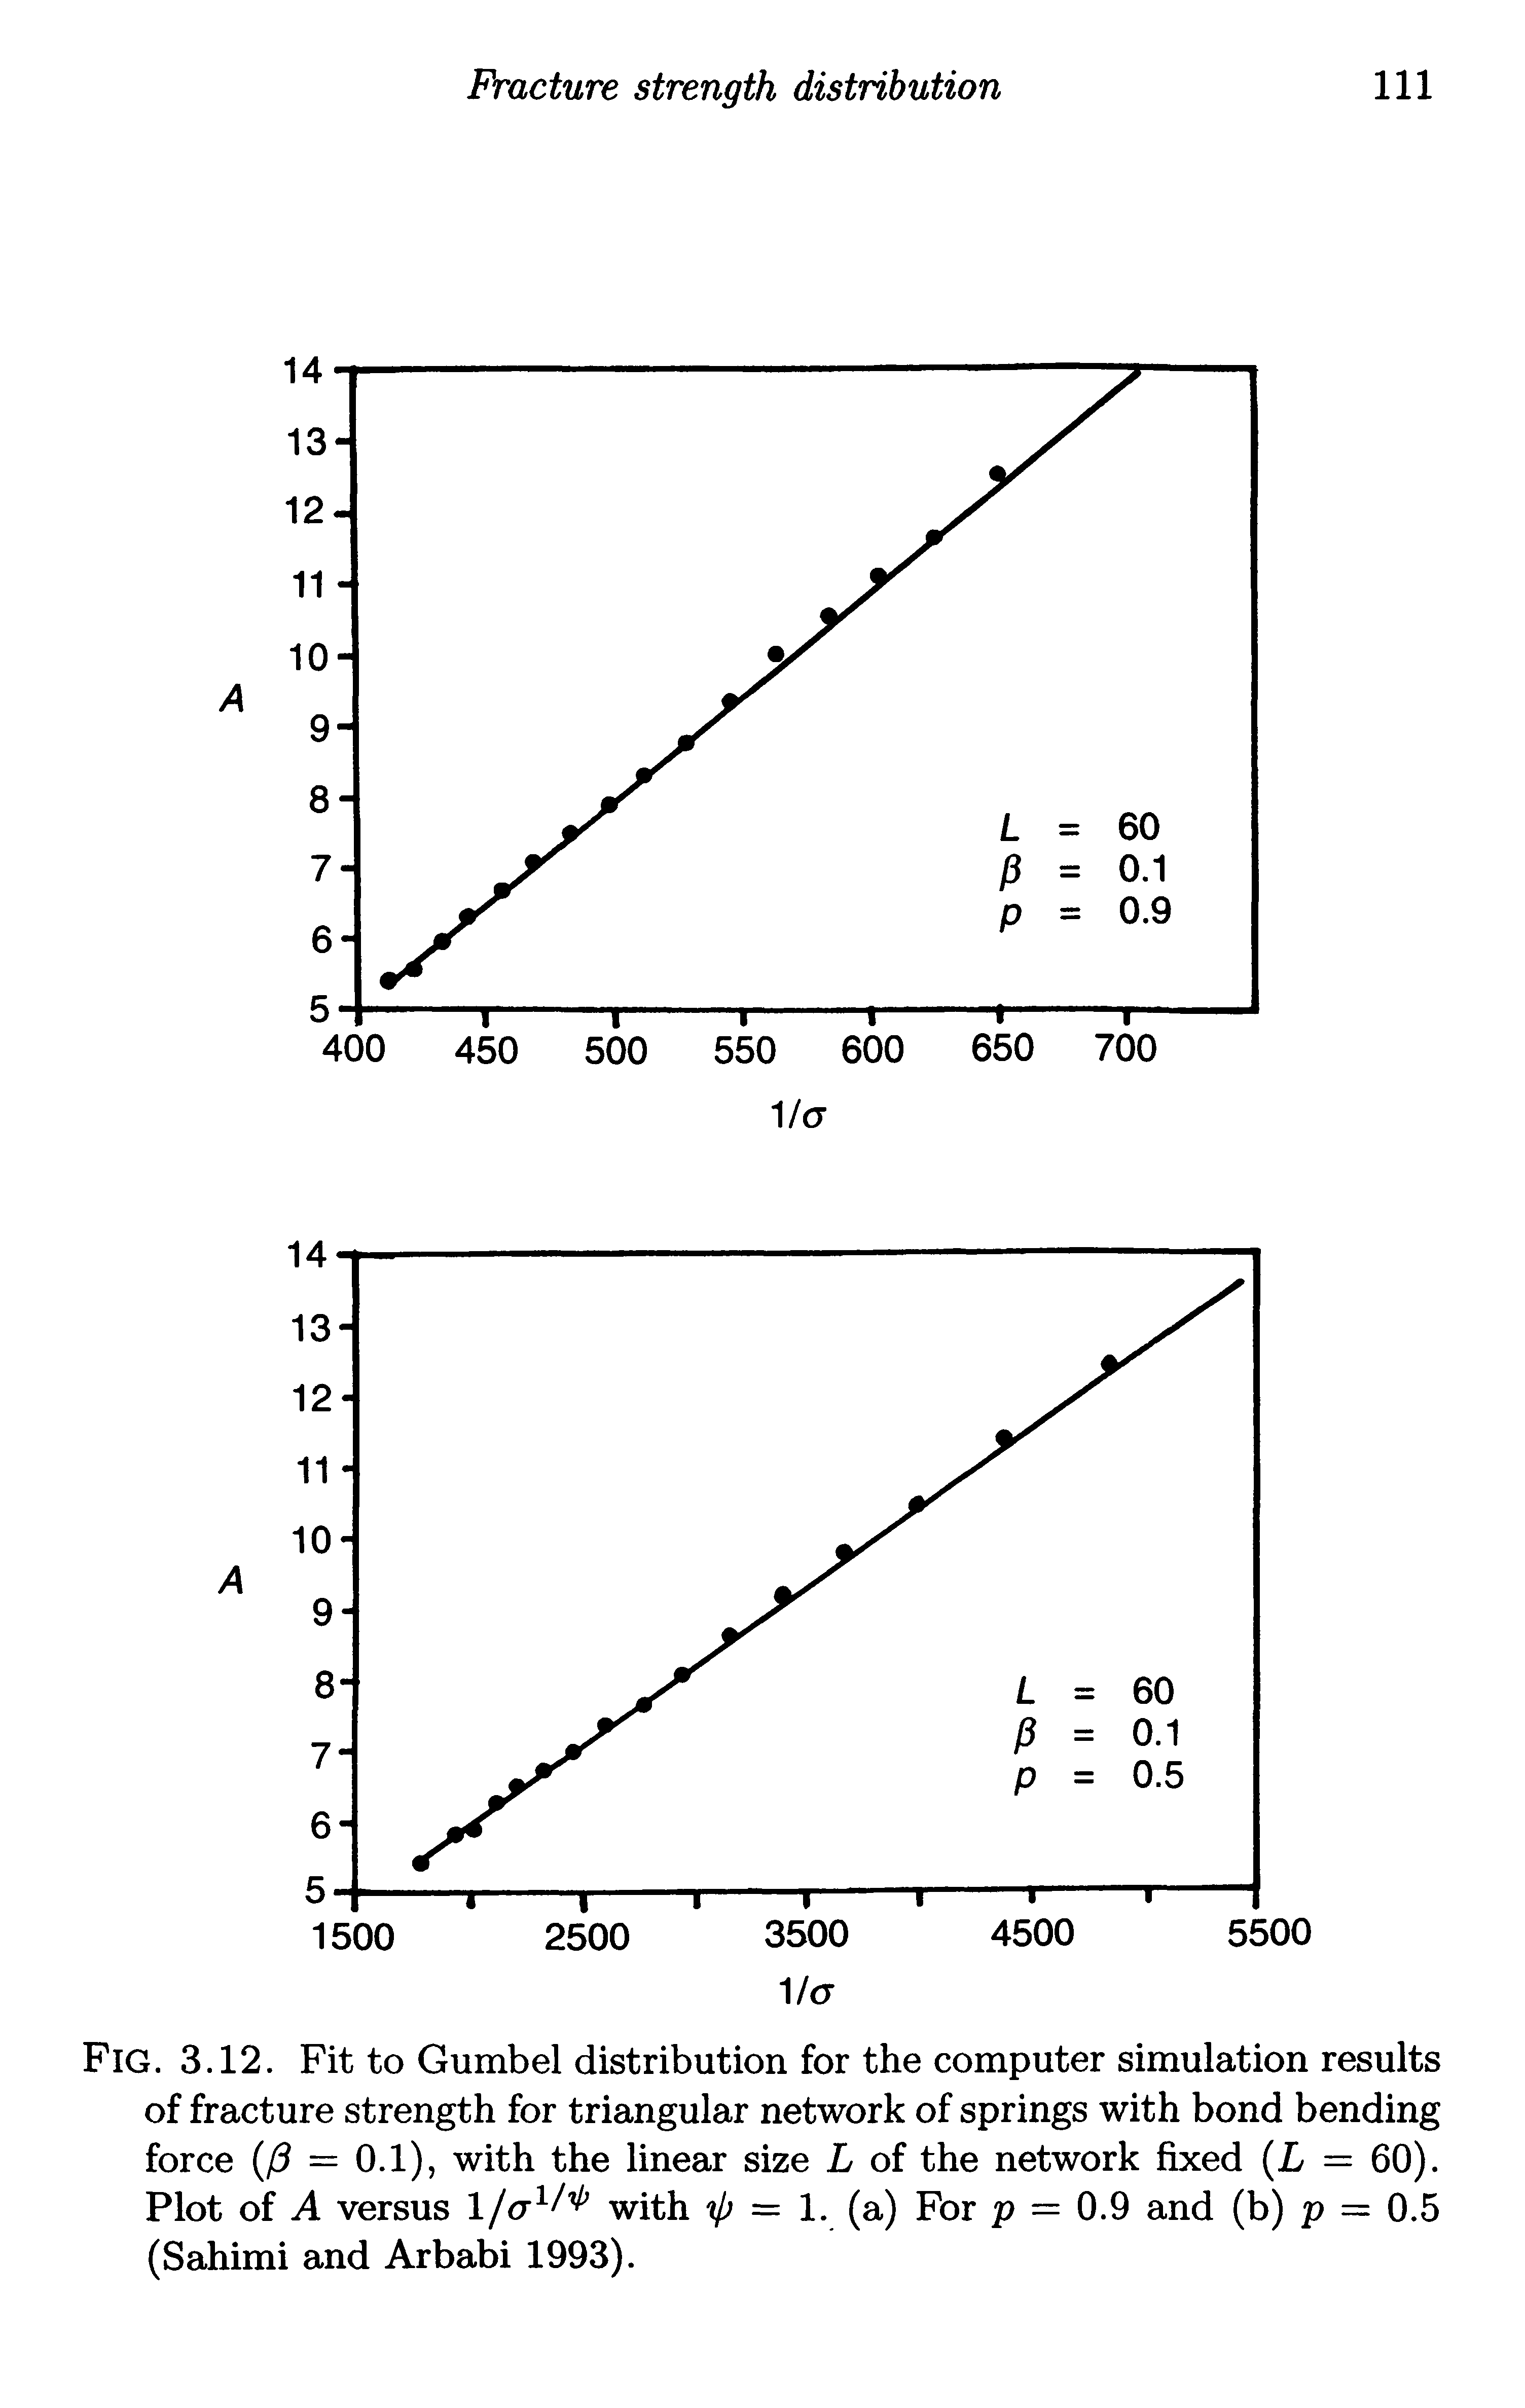 Fig. 3.12. Fit to Gumbel distribution for the computer simulation results of fracture strength for triangular network of springs with bond bending force l3 = 0.1), with the linear size L of the network fixed (L = 60). Plot of A versus with = 1. (a) For p = 0.9 and (b) p = 0.5...